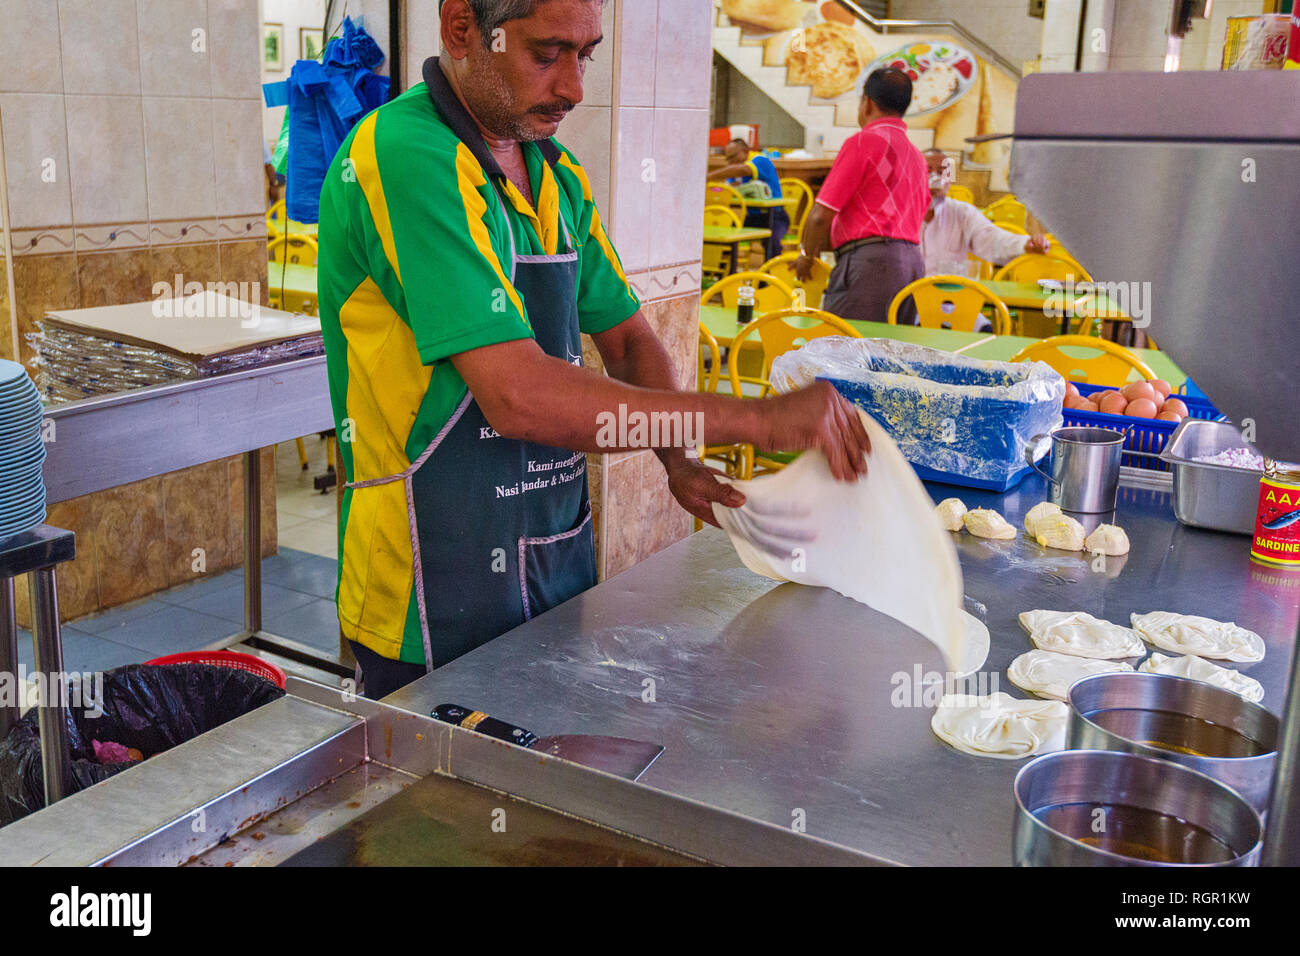 making of Roti Canai. Roti canai  is a type of Indian-influenced flatbread found in George Town, Penang, Malaysia Stock Photo